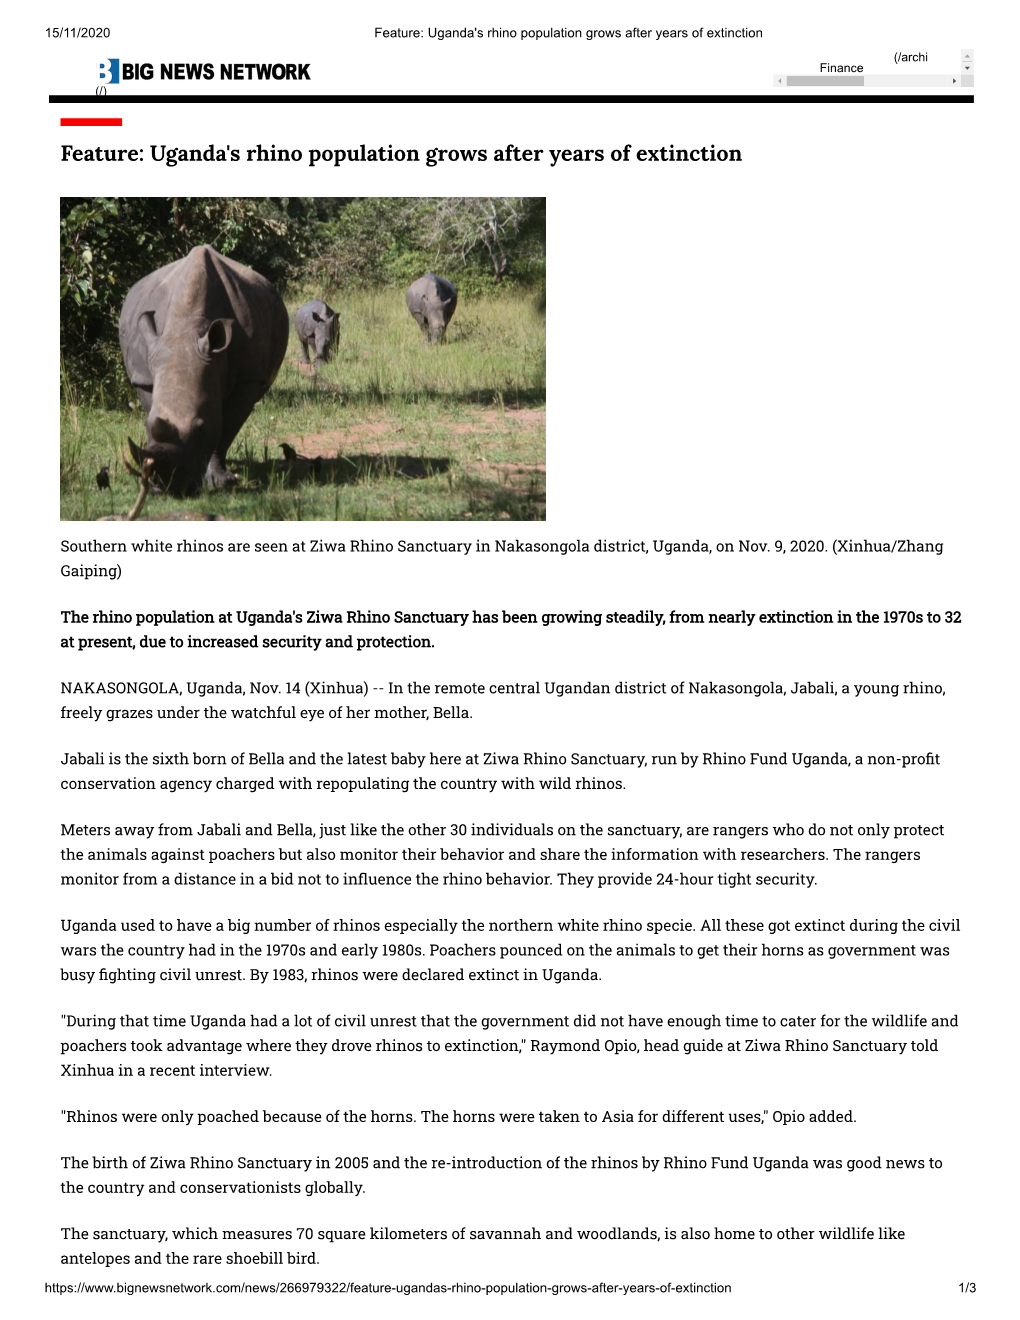 Feature: Uganda's Rhino Population Grows After Years of Extinction (/Archi (/) Finance (/)